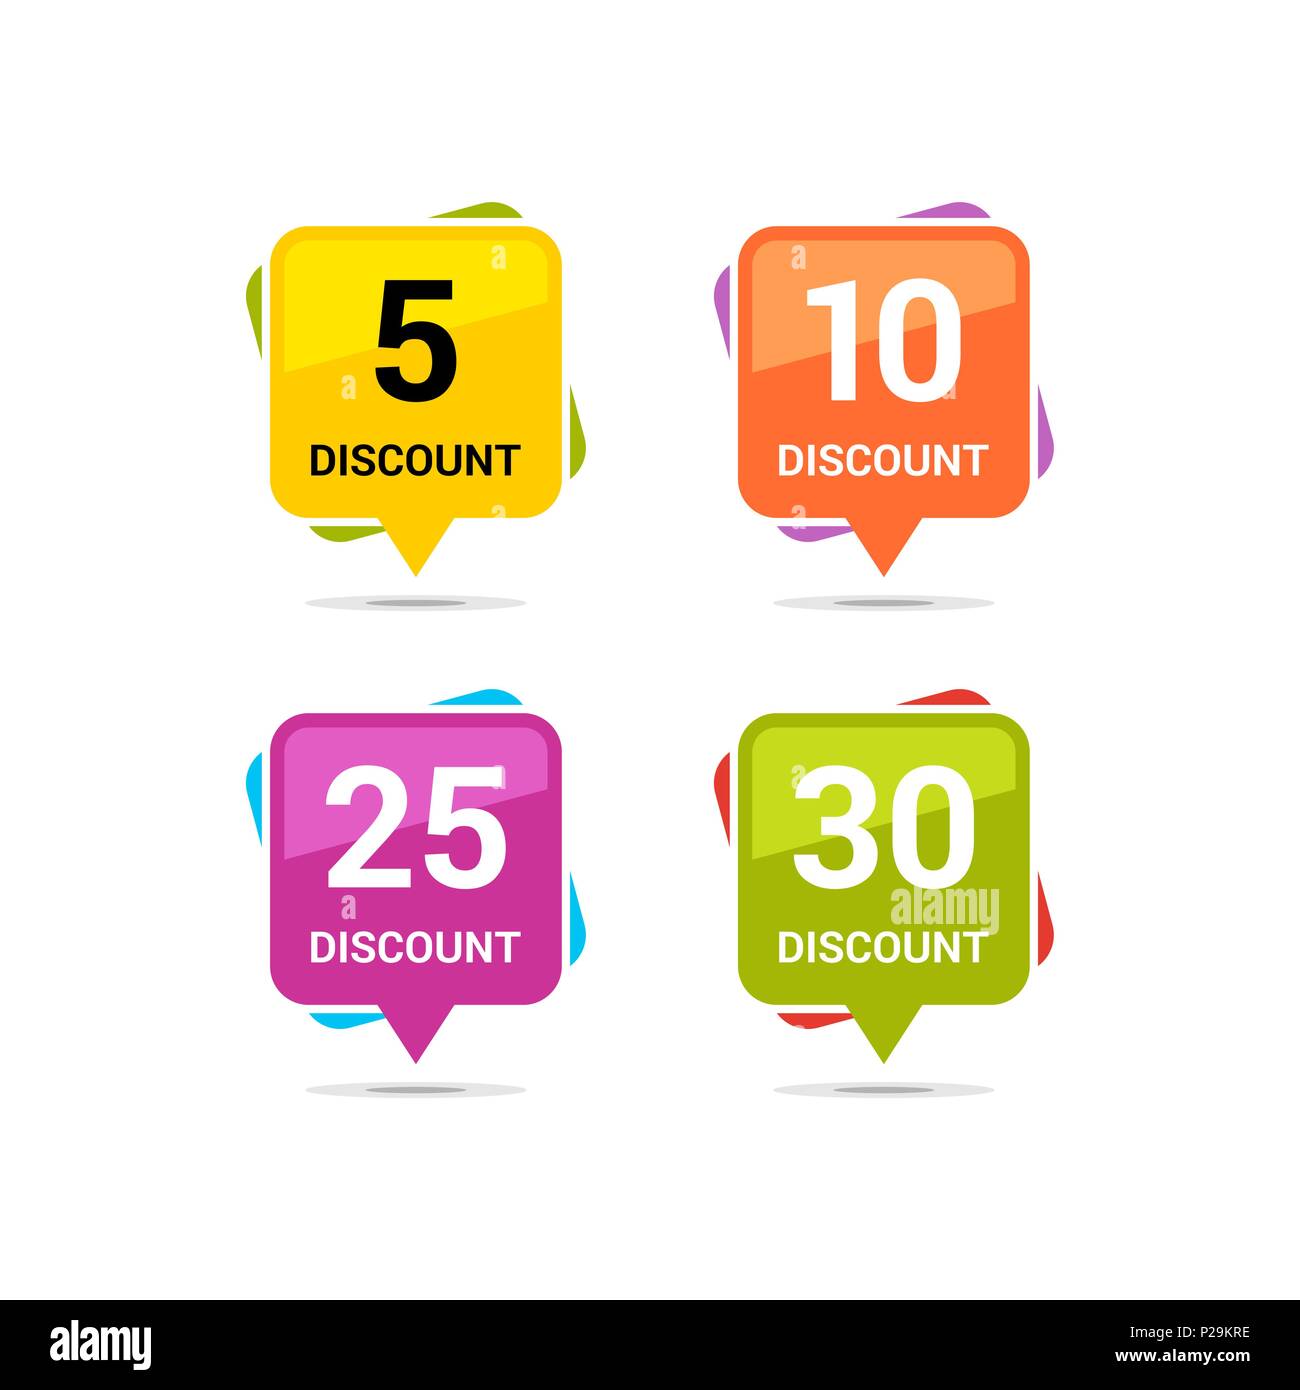 Sale discount square icons. Special offer price signs. 5, 10, 25 and 30 percent off reduction symbols. Colored vector flat elements badges Stock Vector